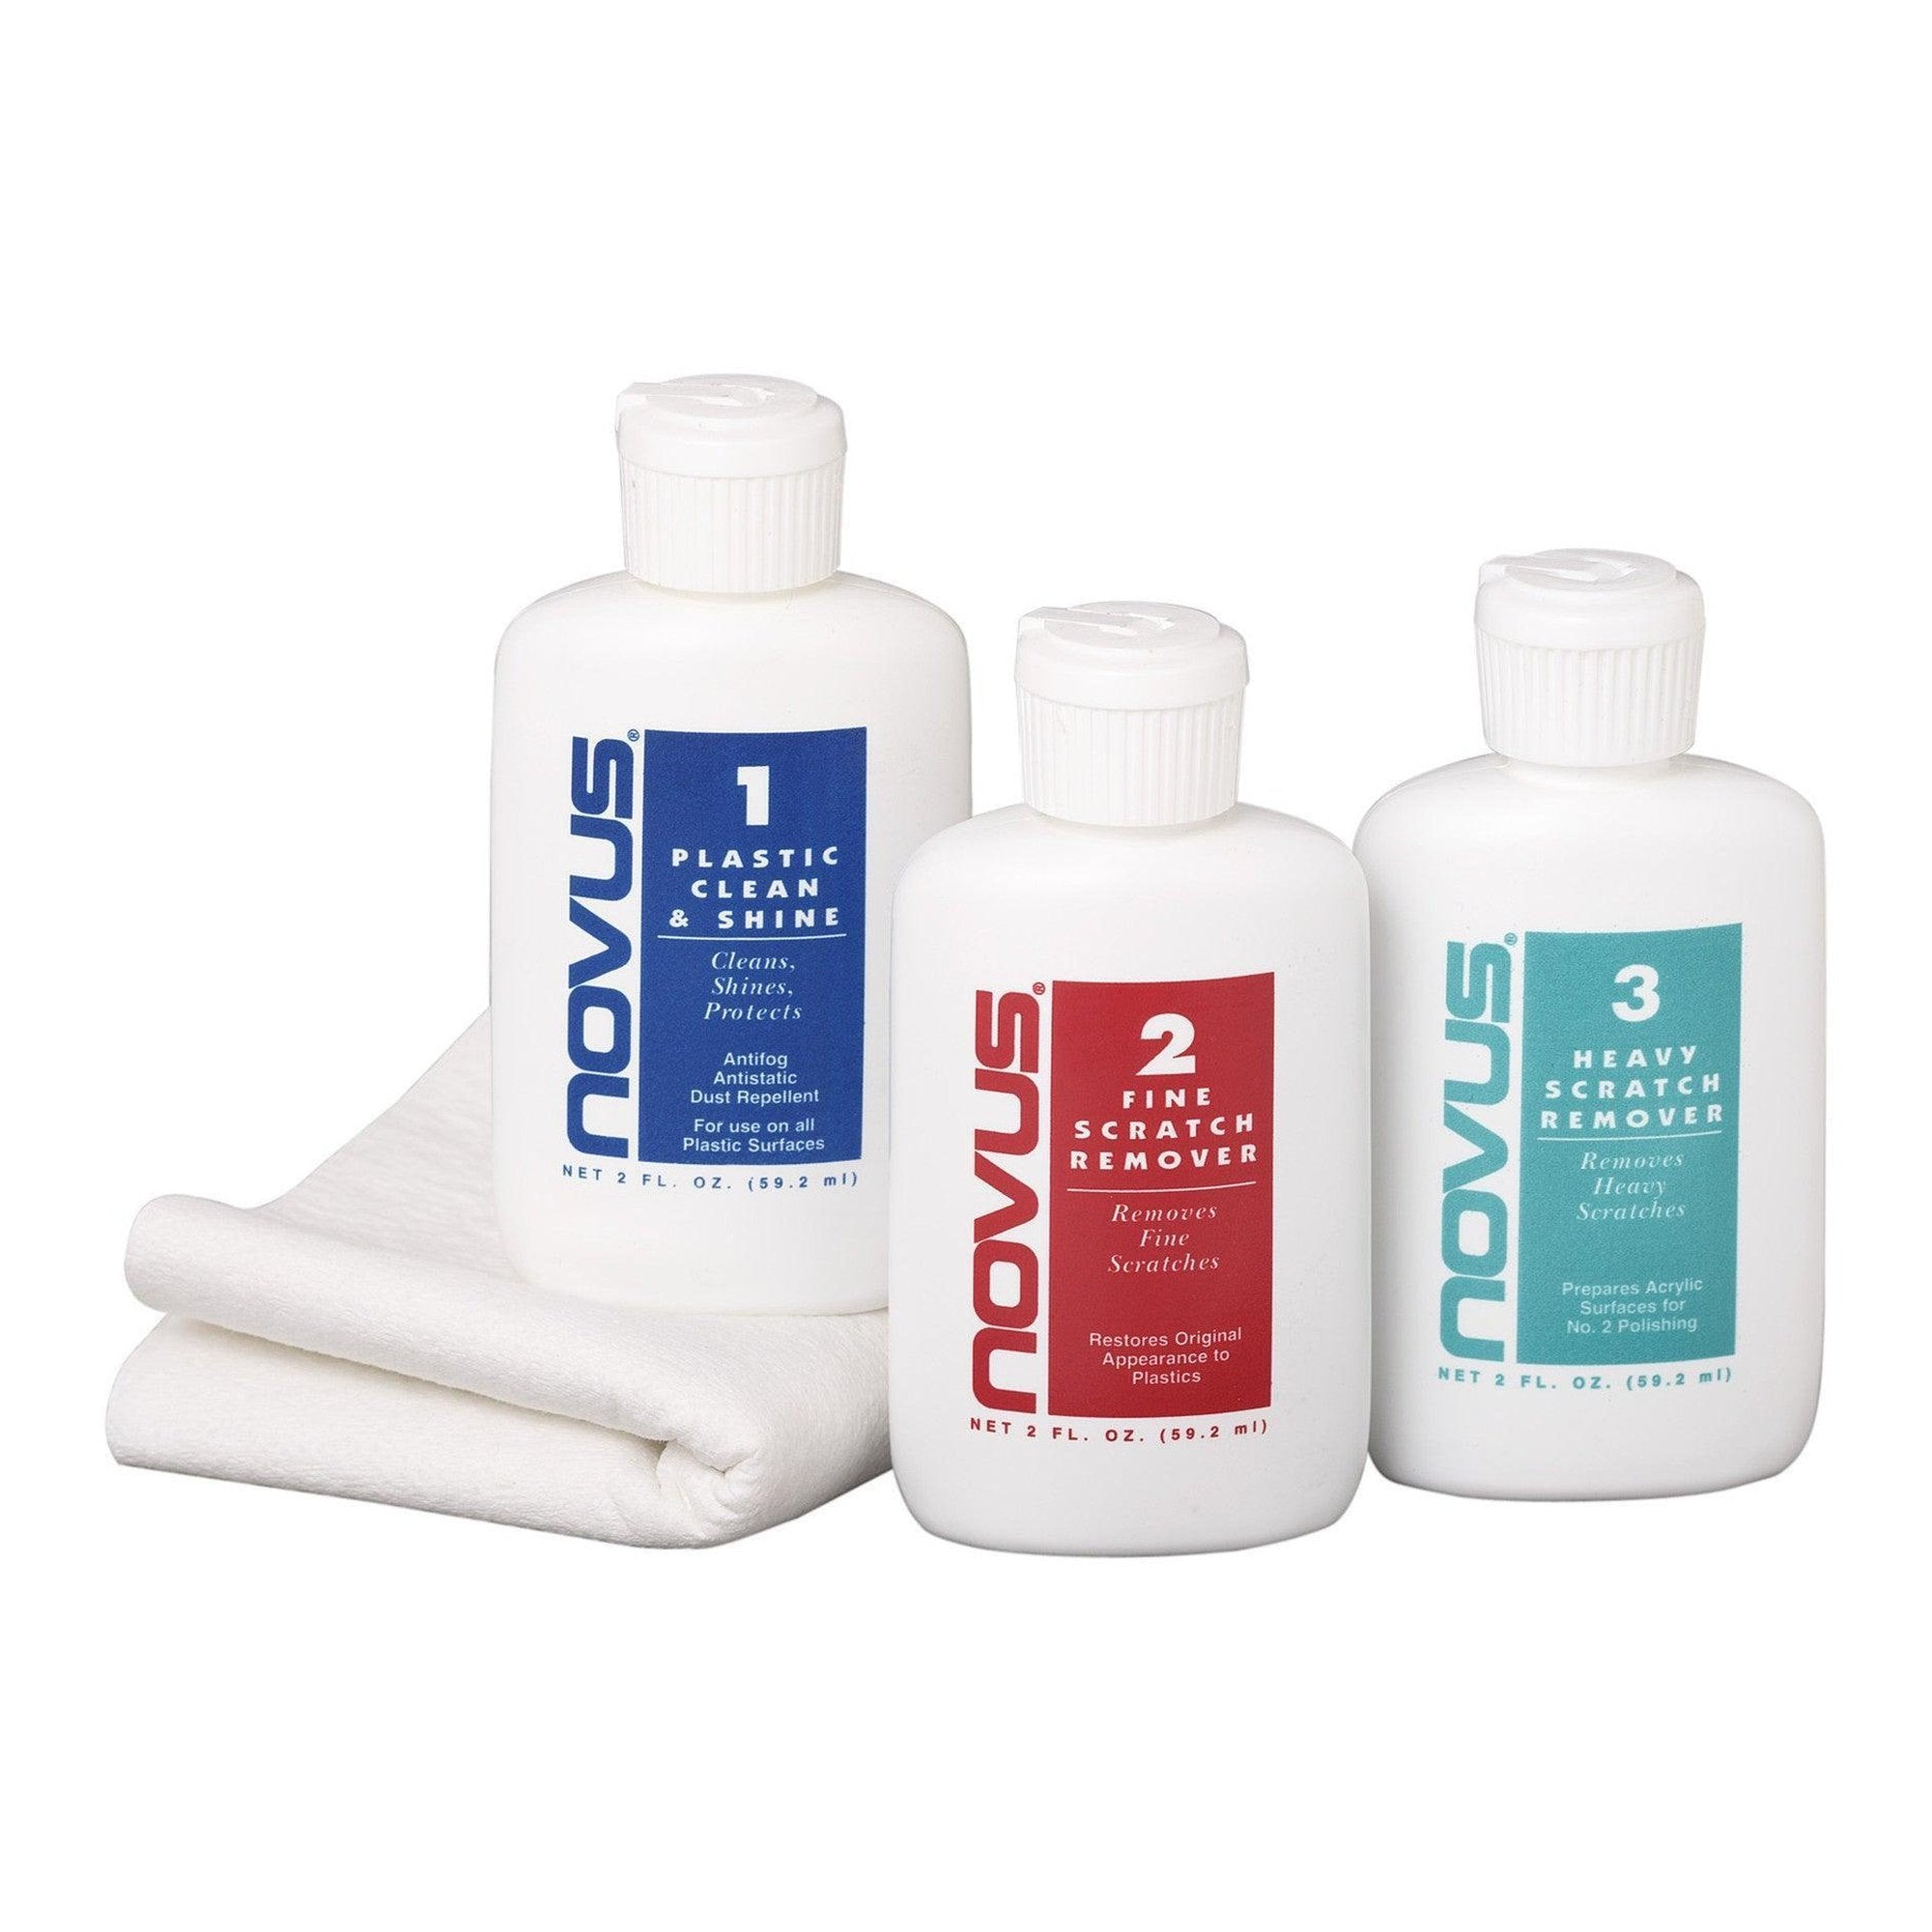 Novus Cleaning and Scratch Remover Kit